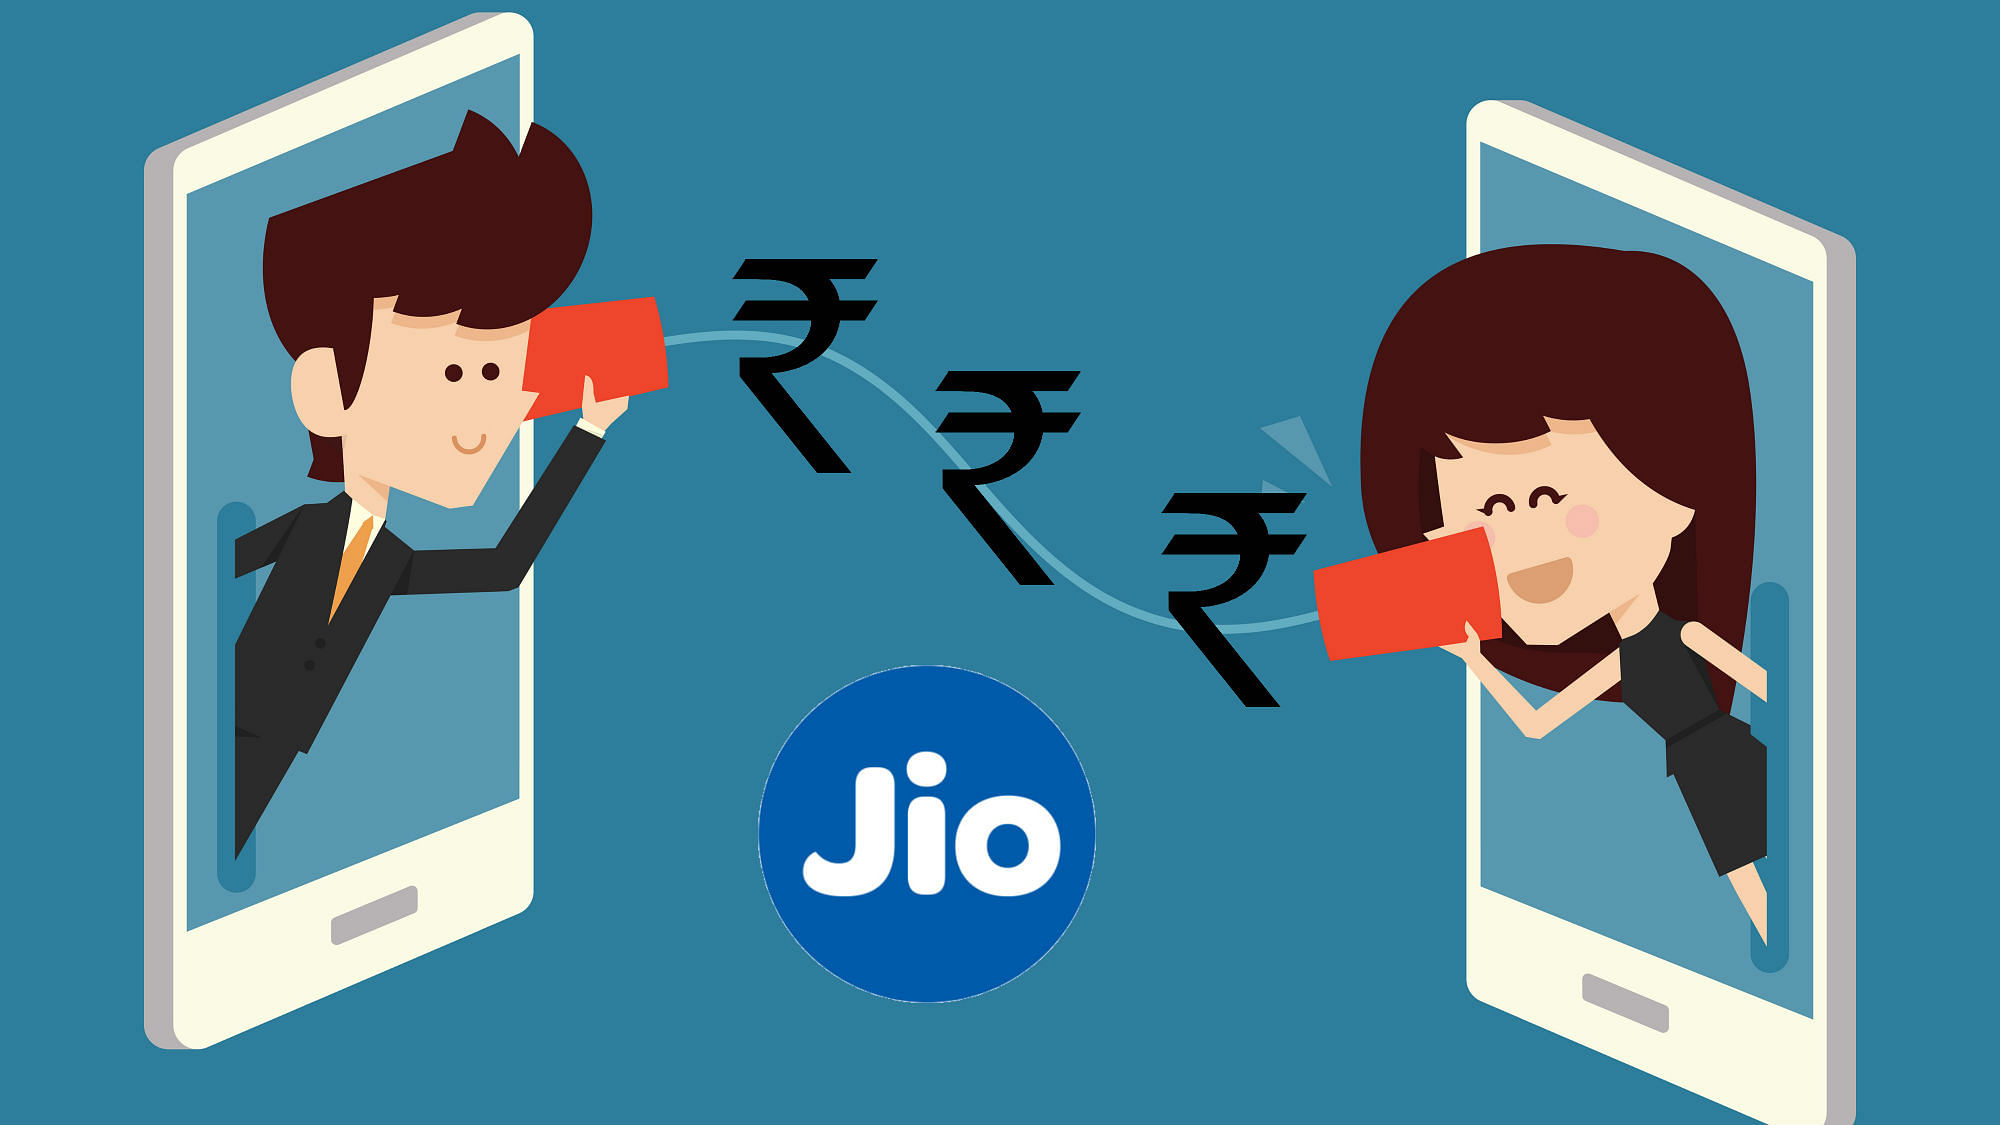 Time to say goodbye to free Jio 4G? (Photo: <b>The Quint</b>)